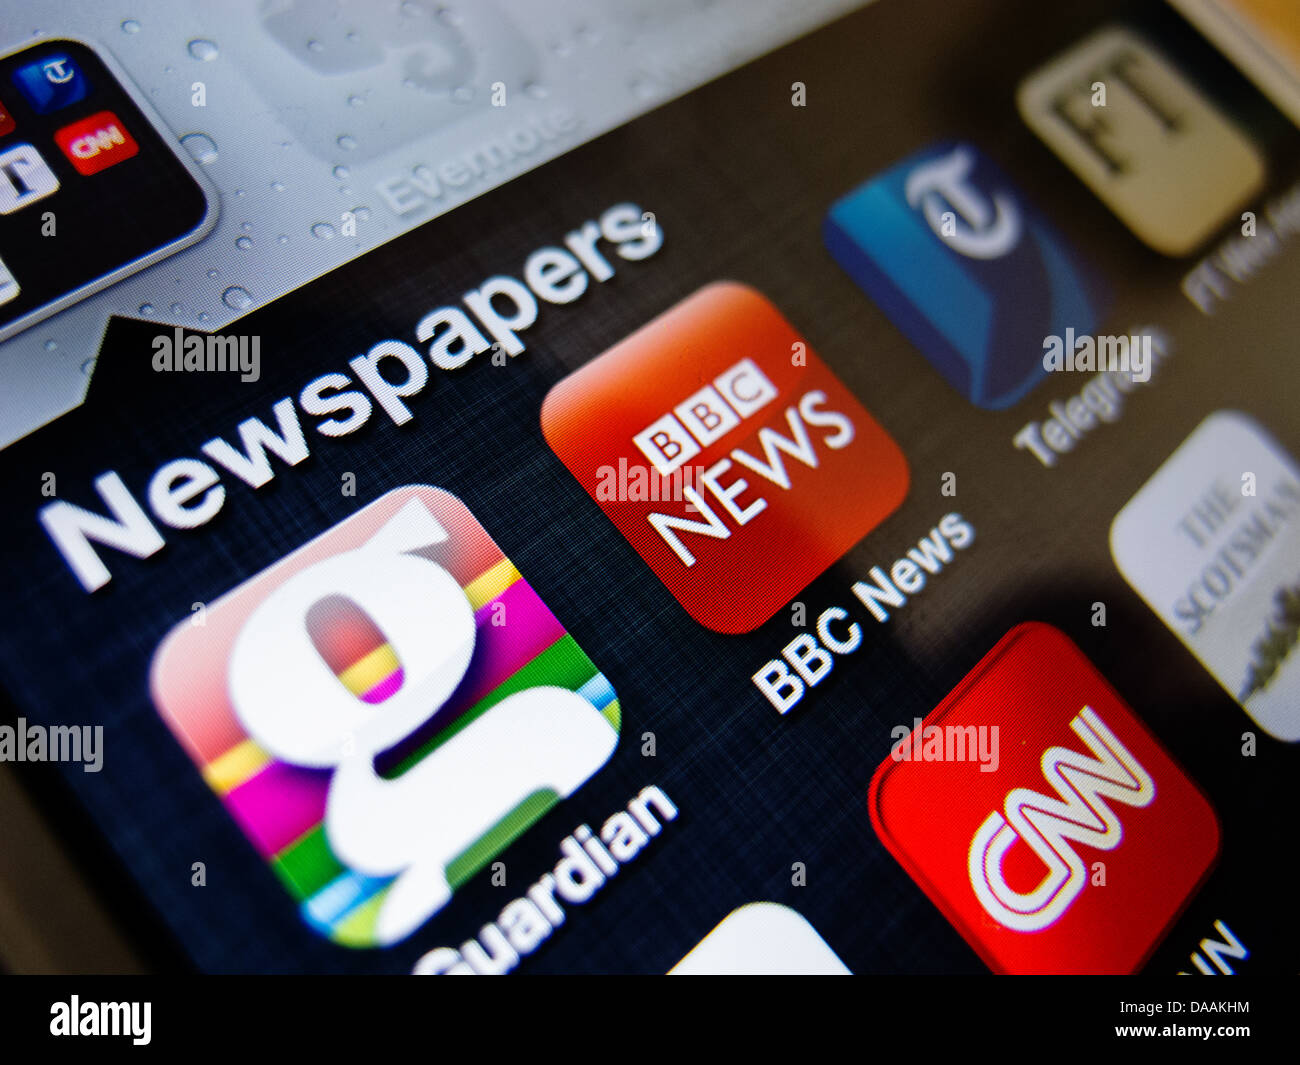 Detail of iPhone 5 smart phone screen showing newspaper apps icons Stock Photo